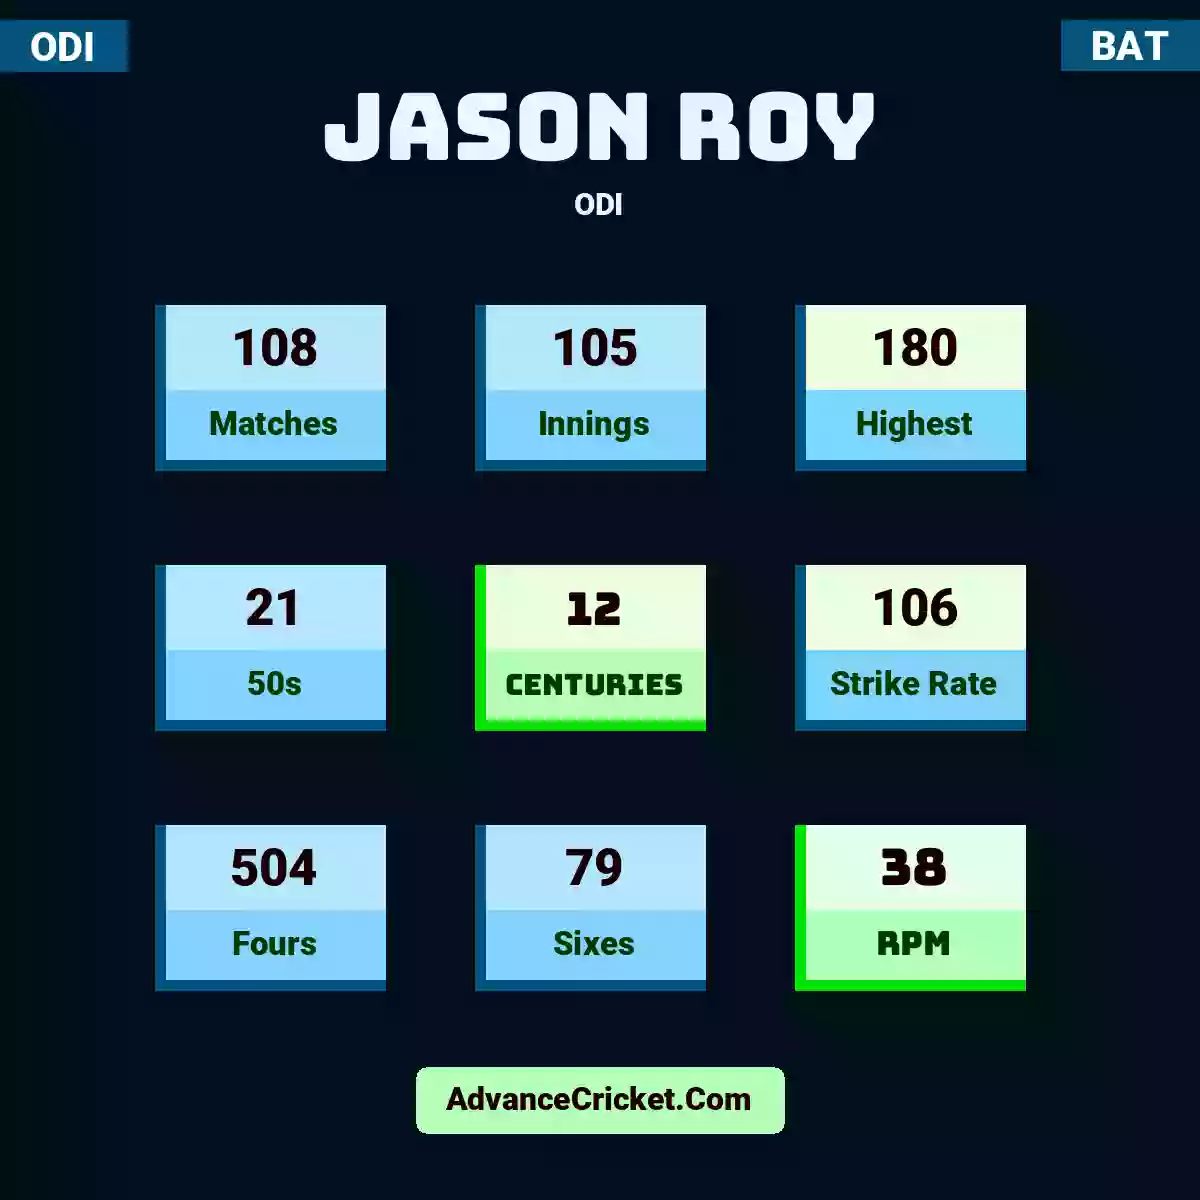 Jason Roy ODI , Jason Roy played 108 matches, scored 180 runs as highest, 21 half-centuries, and 12 centuries, with a strike rate of 106. J.Roy hit 504 fours and 79 sixes, with an RPM of 38.